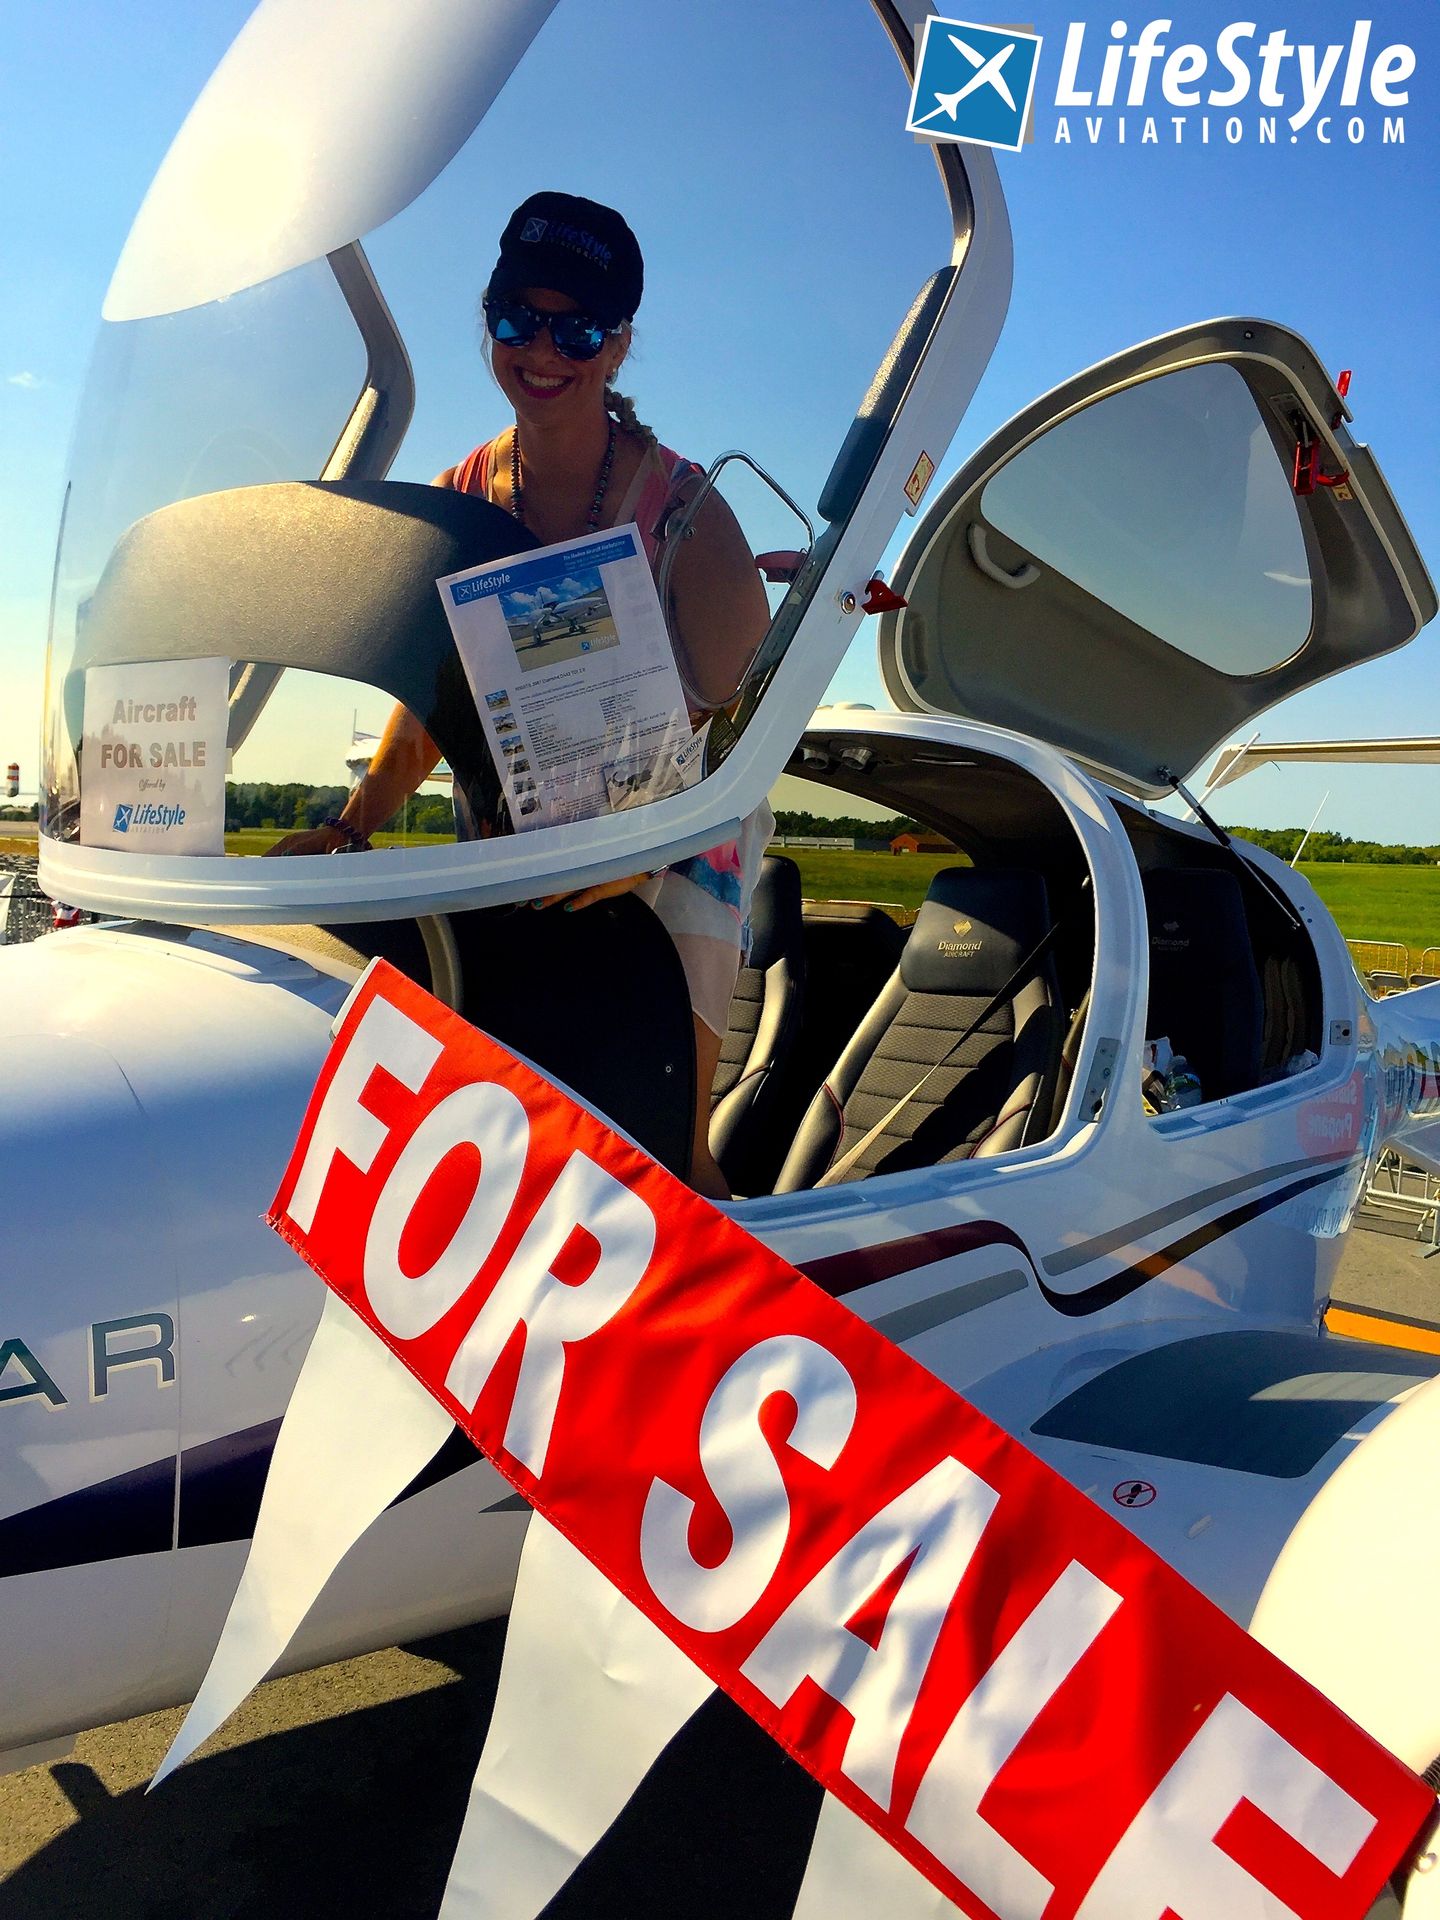 DA42 for sale at NY Air Show 2016